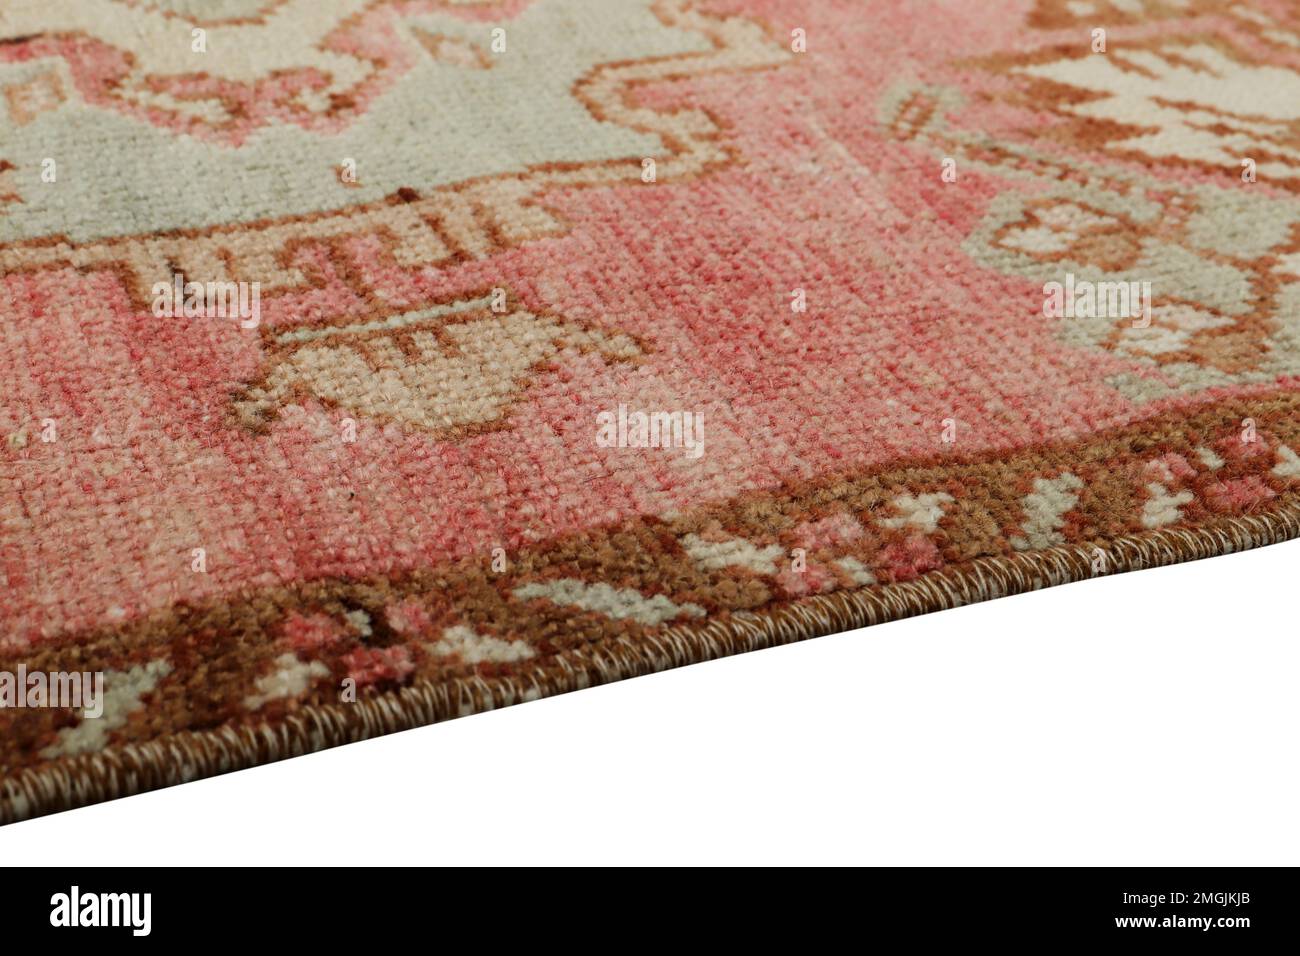 Textures and patterns in color from woven carpets Stock Photo